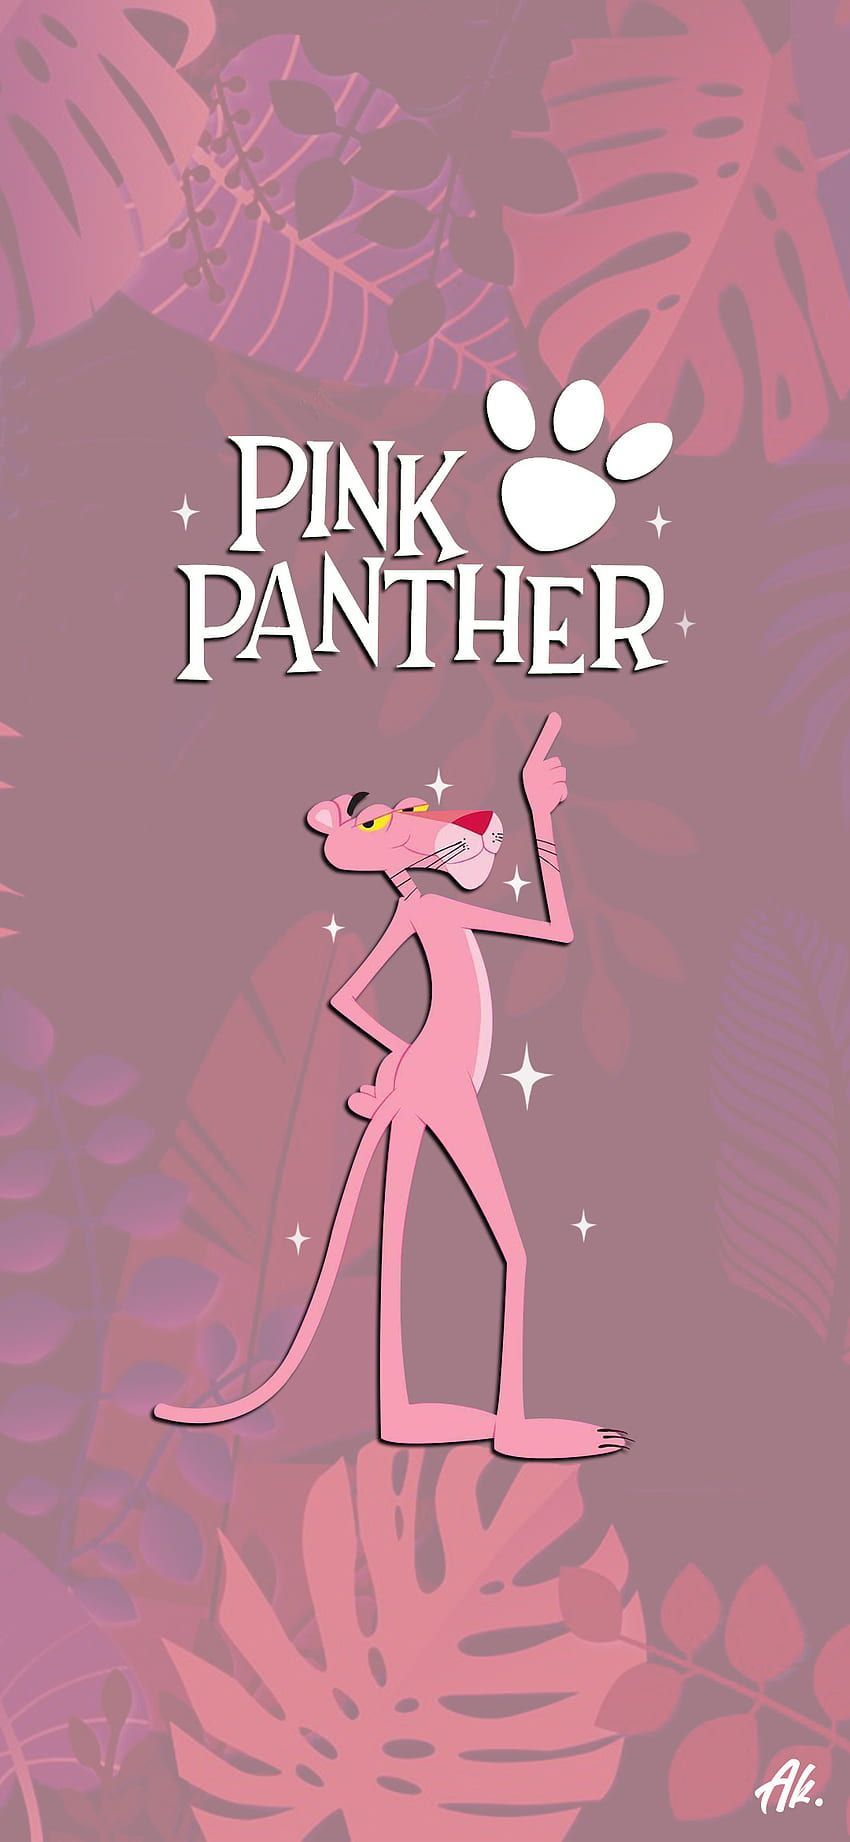 Pink Panther iPhone Wallpaper with high-resolution 1080x1920 pixel. You can use this wallpaper for your iPhone 5, 6, 7, 8, X, XS, XR backgrounds, Mobile Screensaver, or iPad Lock Screen - Pink Panther